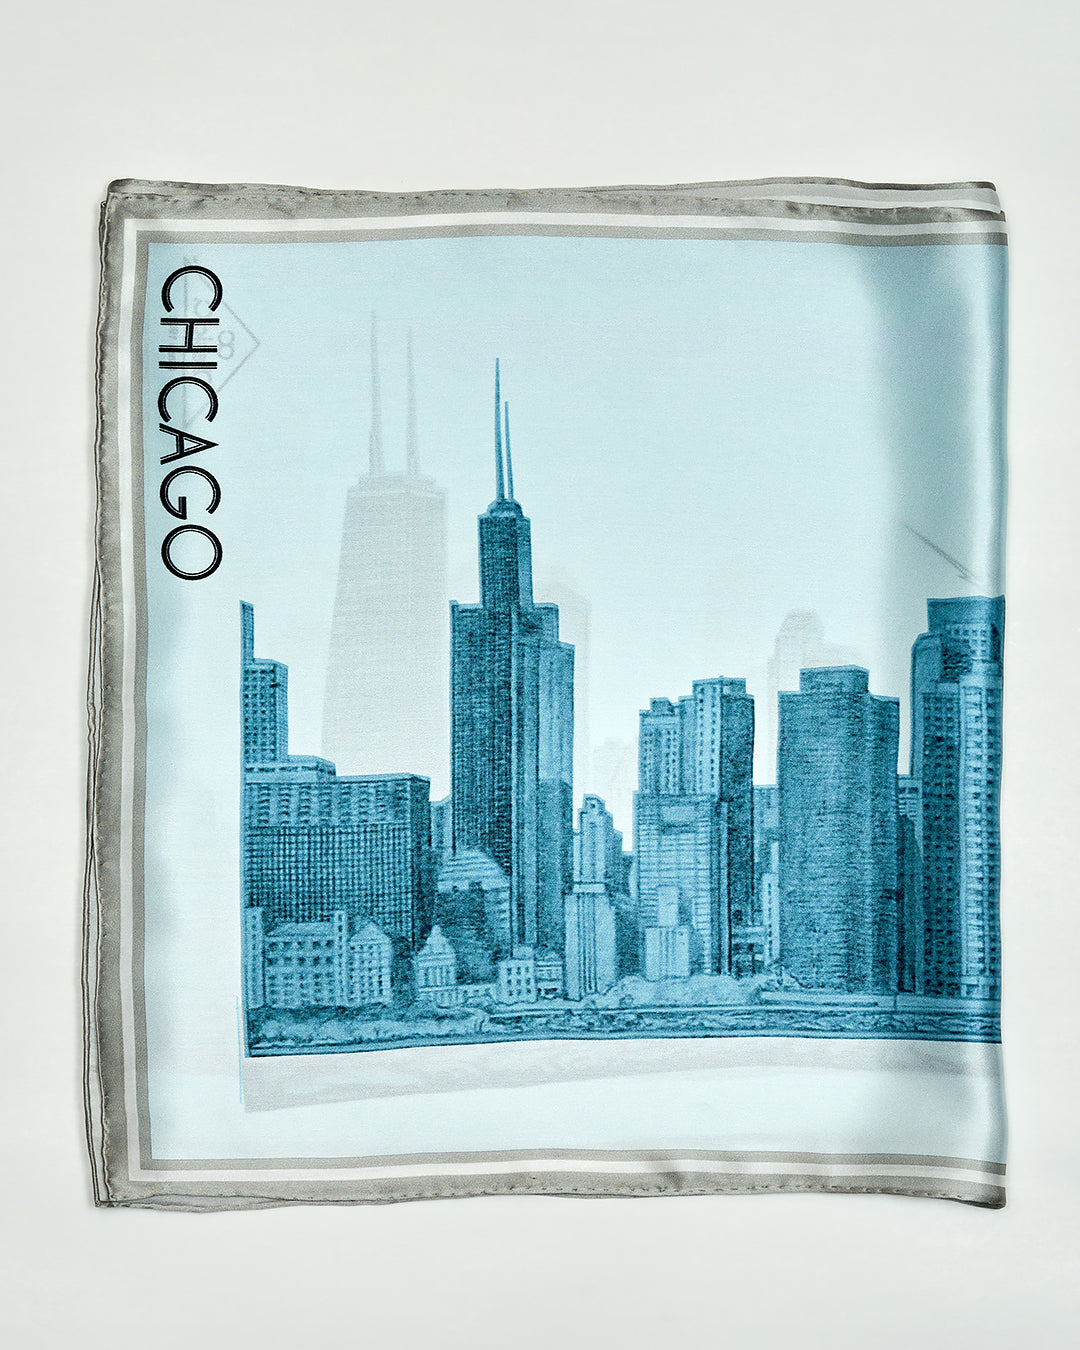 CHICAGO Skyline 100% Silk Scarves, Ties, Key Rings, Drinkwear, Credit Card Holders Timeless Accessories and Souvenirs by Alesia Chaika